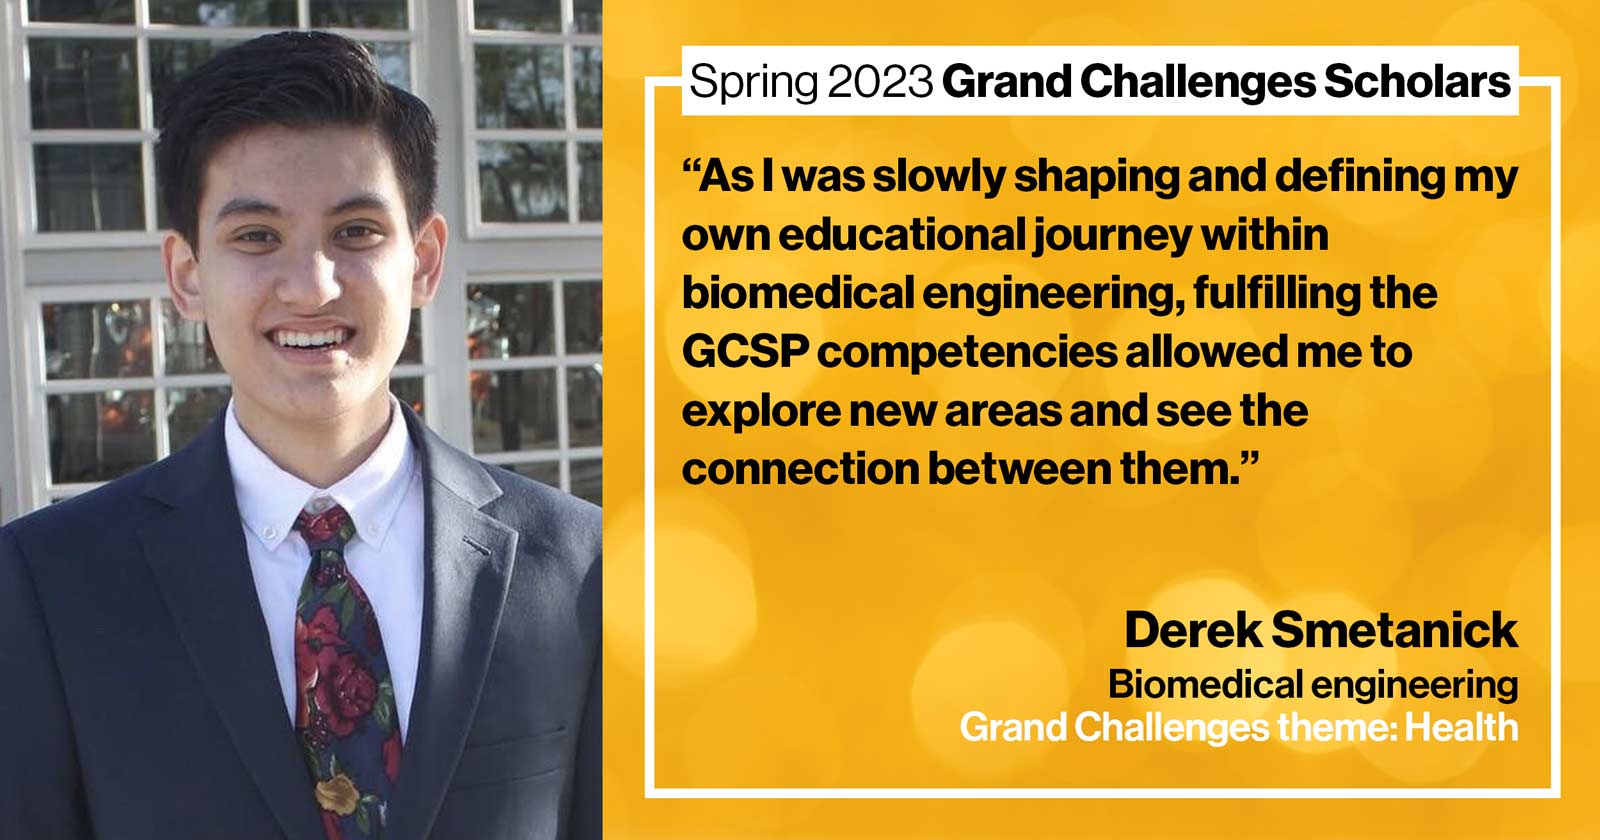 "Derek Smetanick Biomedical engineering Grand Challenge: Health Quote: “As I was slowly shaping and defining my own educational journey within biomedical engineering, fulfilling the GCSP competencies allowed me to explore new areas and see the connection between them.”"